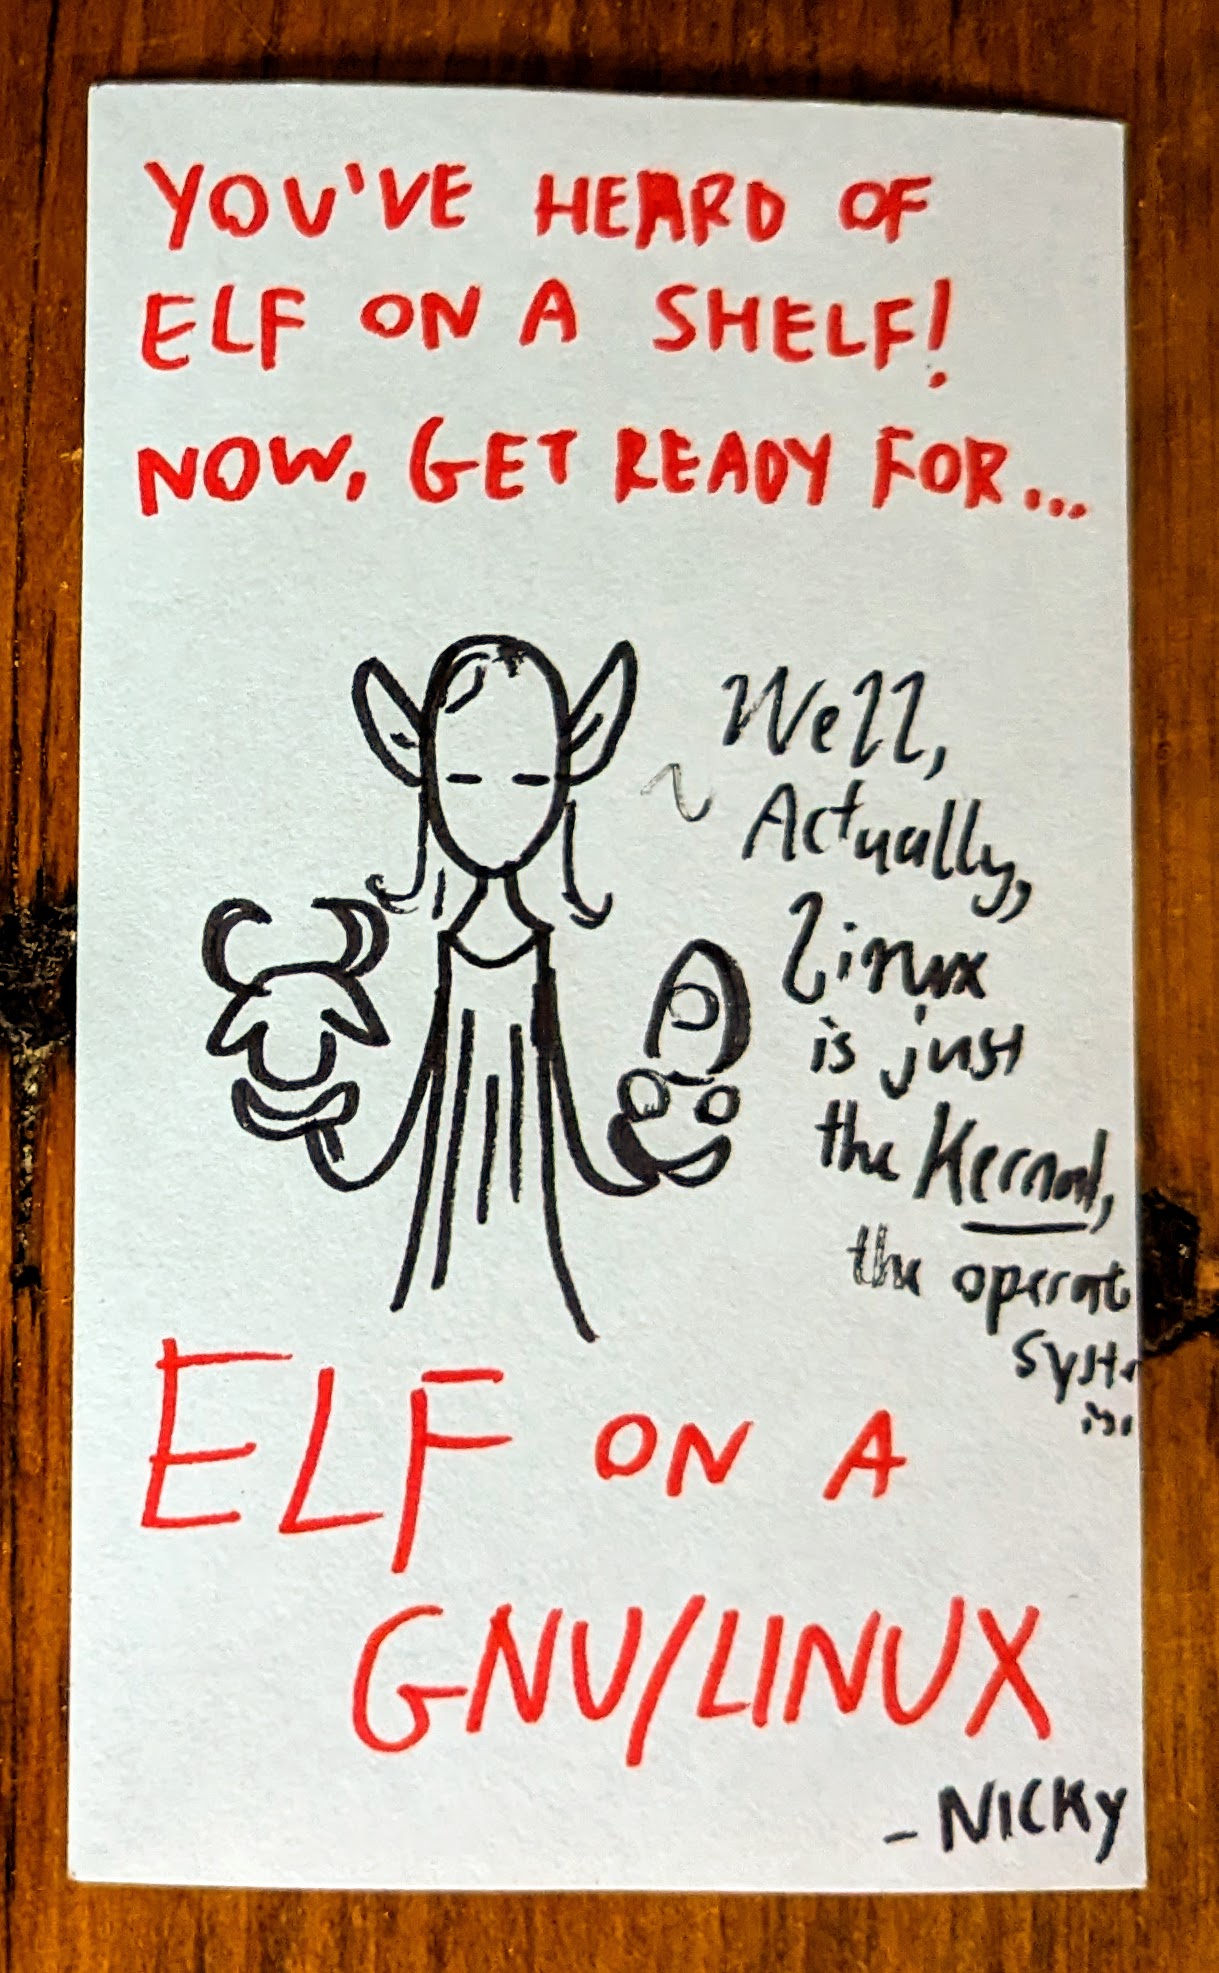 A marker drawing on paper. A wizard elf is shown meditating, holding the head of a gnu in one hand and a Linux penguin in the other. The elf trails off, saying "Well, actually, Linux is just the kernel, the operating system is..." The drawing is captioned in red marker: "You've heard of elf on a shelf! Now, get ready for... elf on a GNU/Linux." The drawing is signed "Nicky."